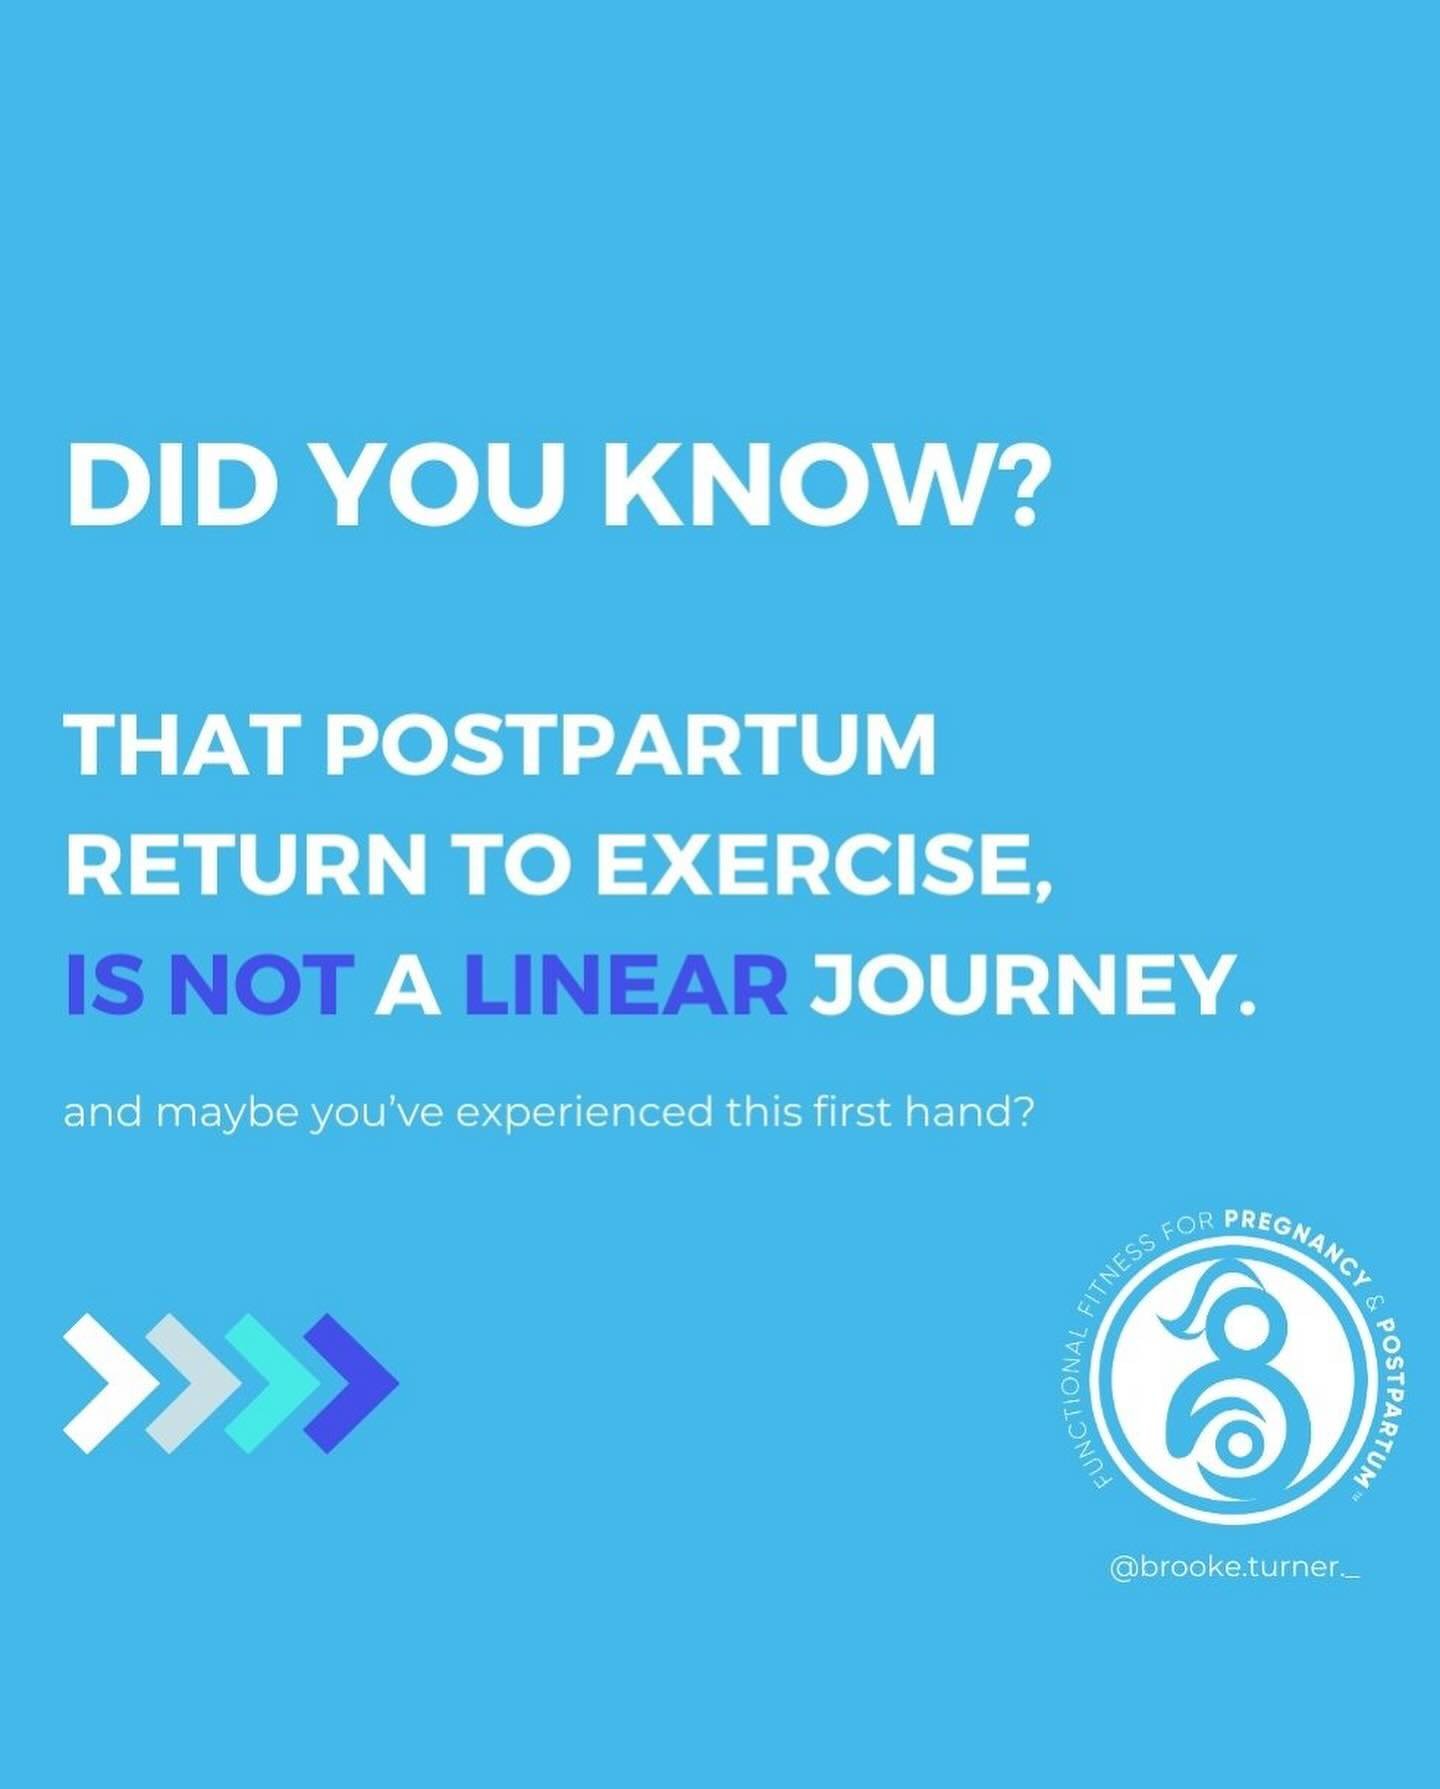 &bull; THE PROGRESS IS NON-LINEAR &bull;

A common mistake I see women &amp; coaches make when getting back into exercise post babies, is that they expect their progress and results to be a fairly straight forward process. Add progressive overall = g